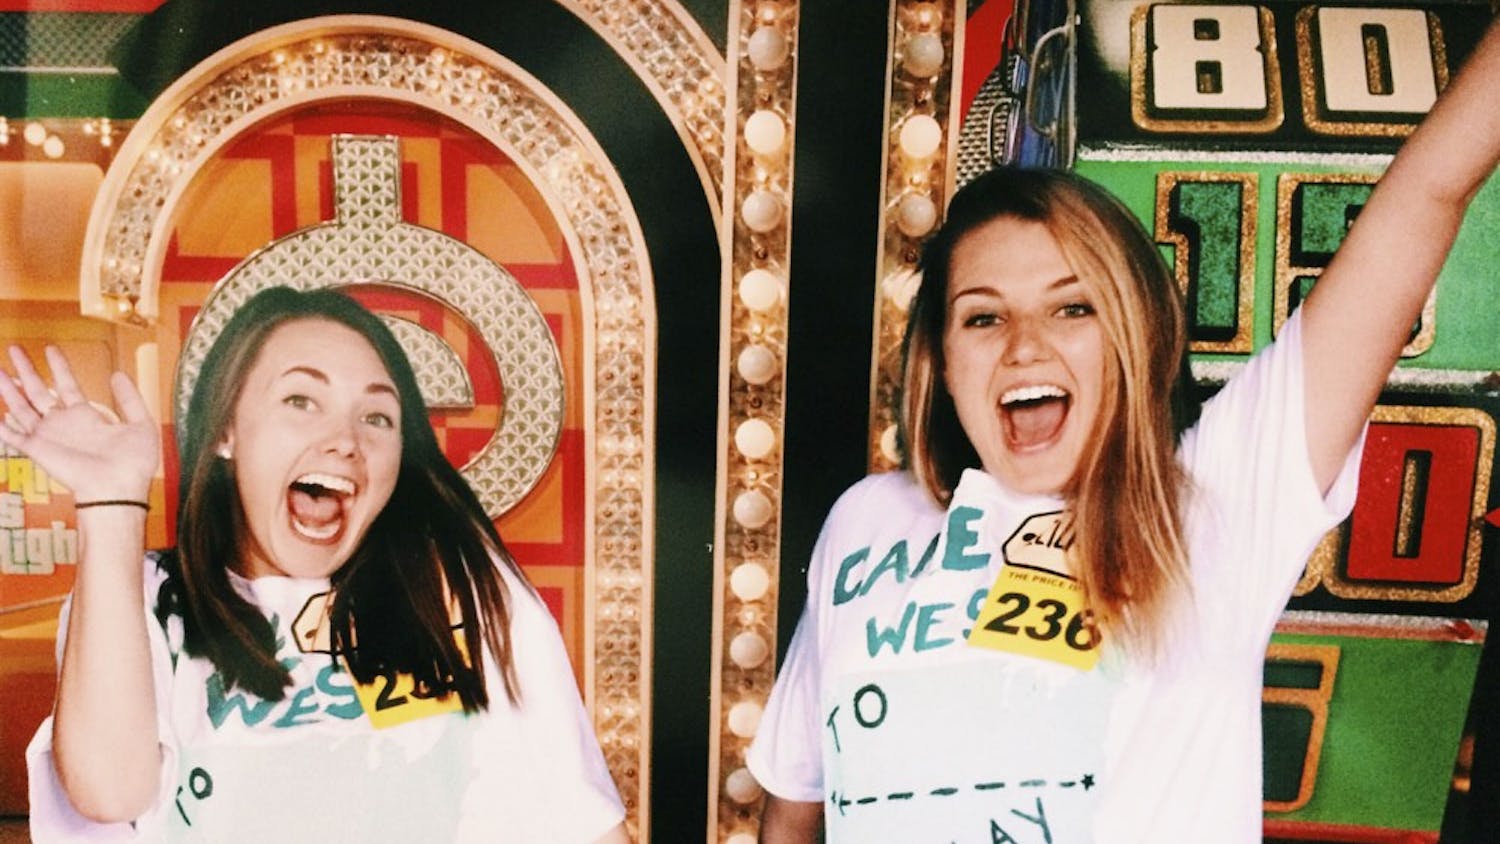 McKay Bartlet (left) and Elizabeth Grady were selected to participate in "The Price is Right" gameshow.&nbsp;Photo Courtesy of Elizabeth Grady.